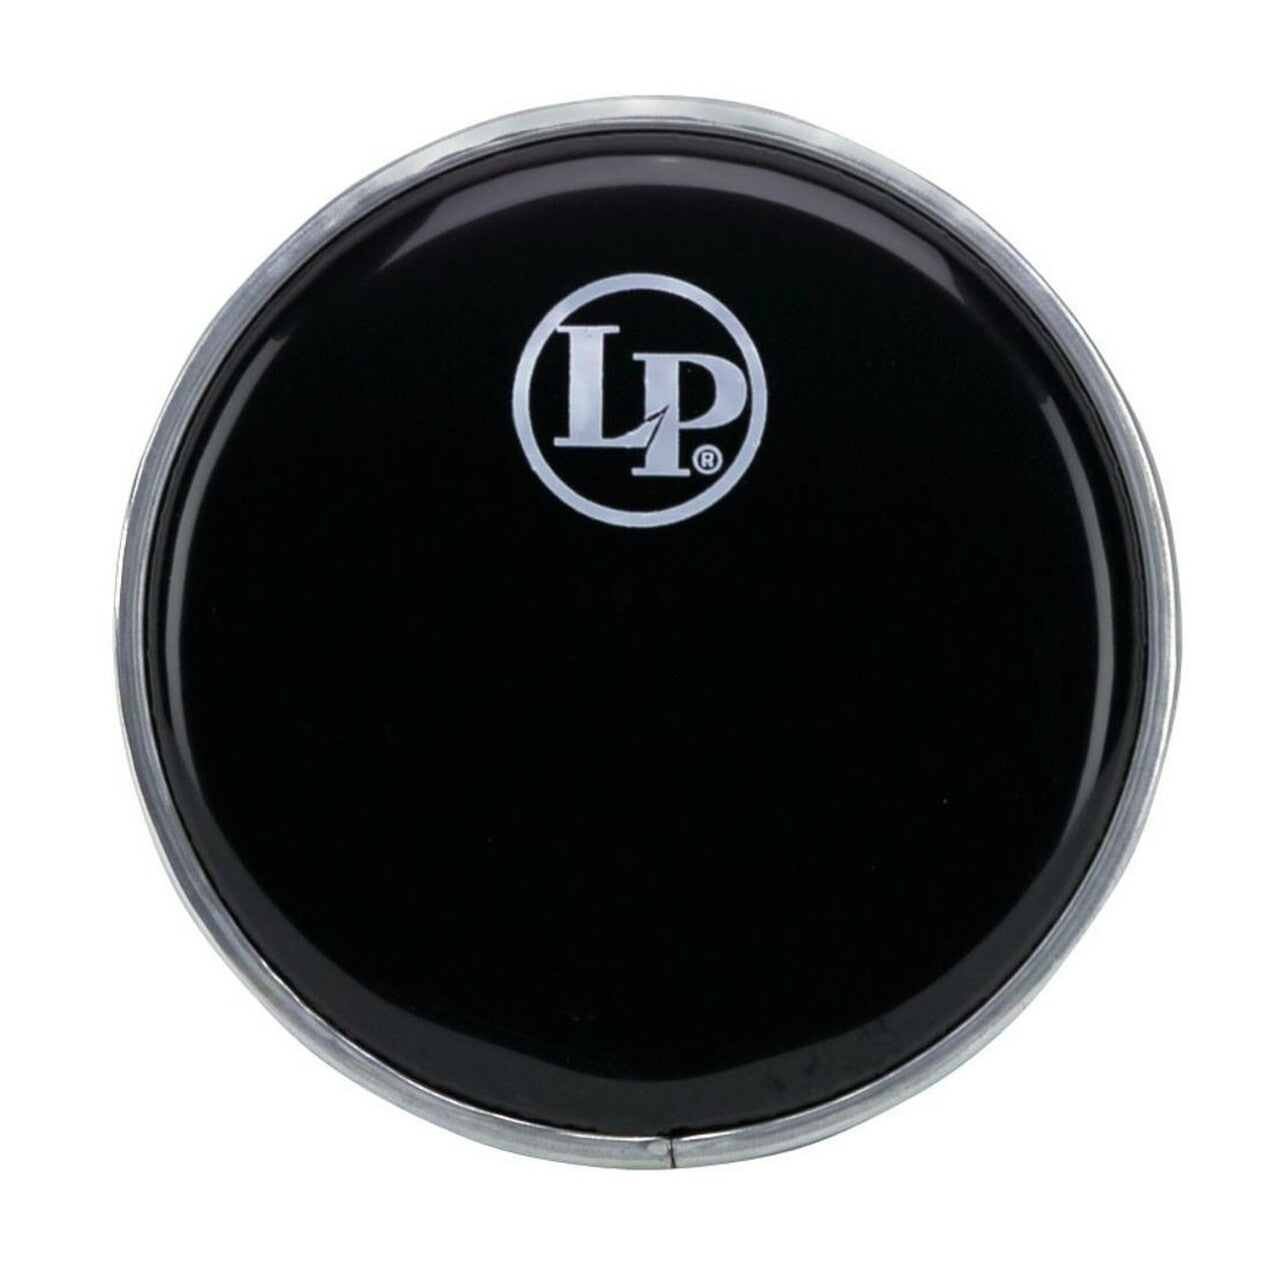 LP Mini Timbale Black Plastic Head (Available in two sizes)